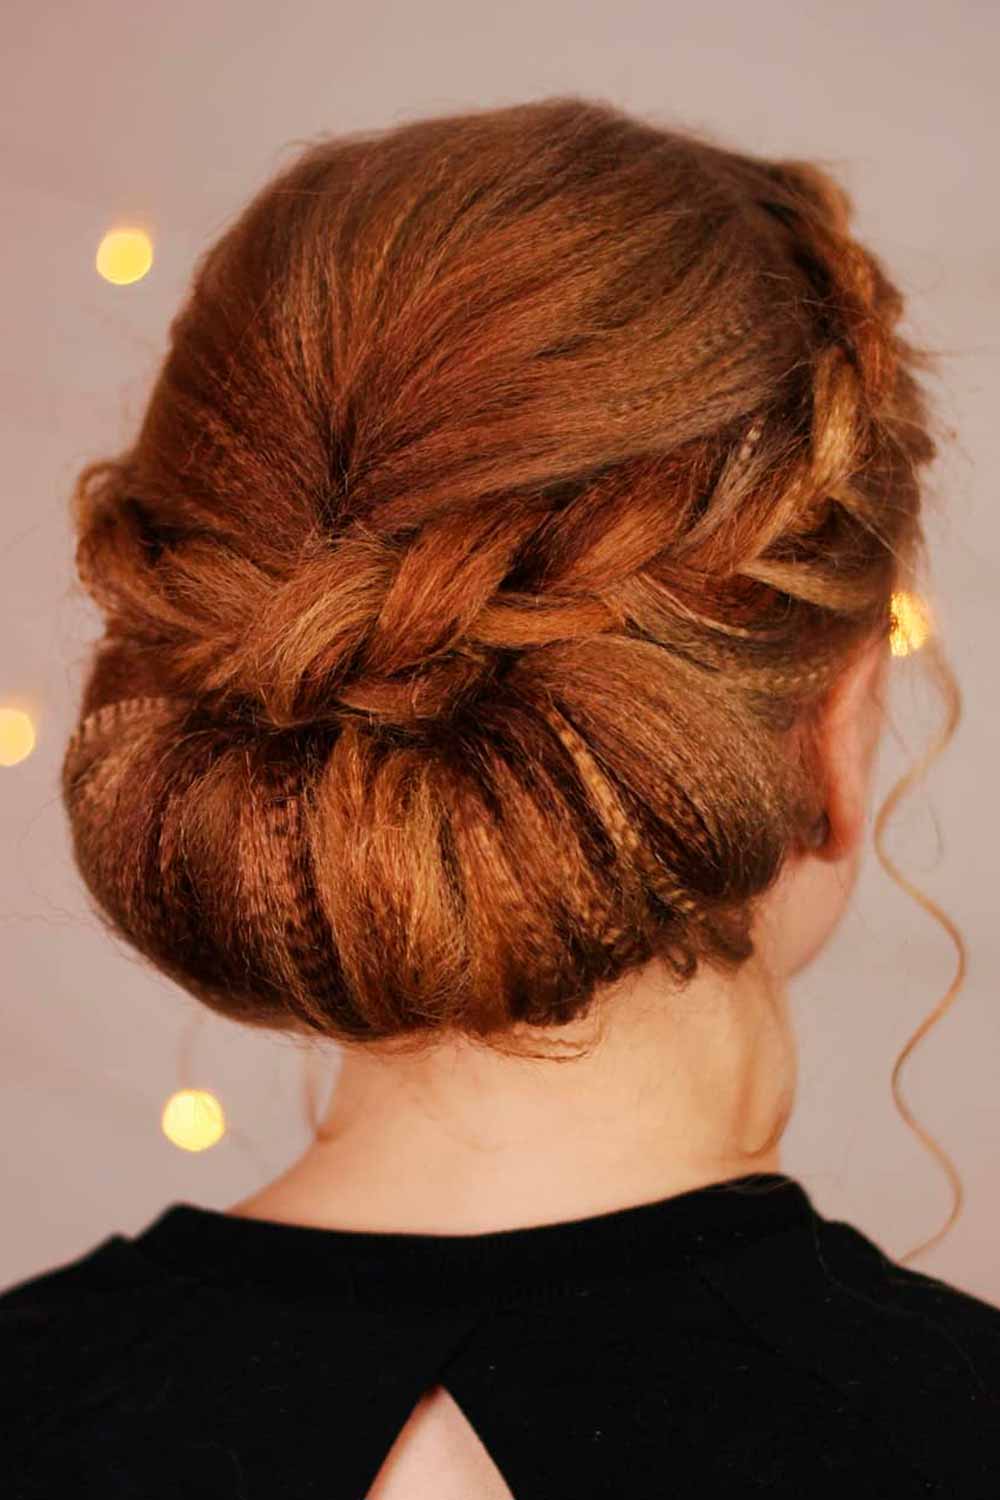 How Long Does It Take To Crimp Hair? #updo #redhair